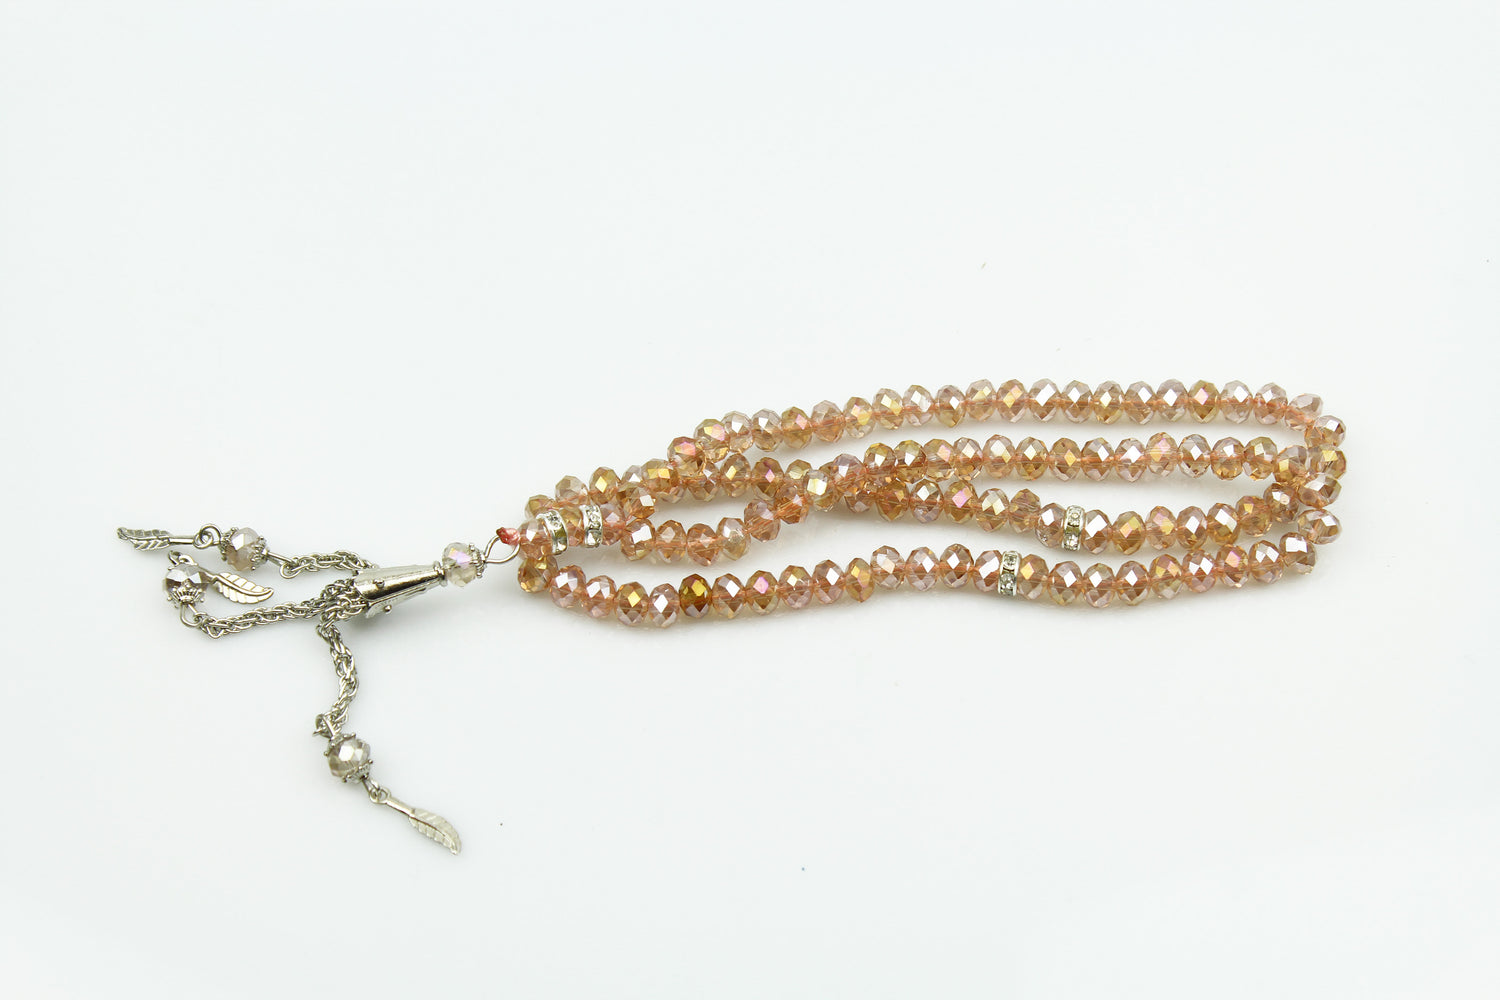 copper crystal tasbeeh with 99 beads